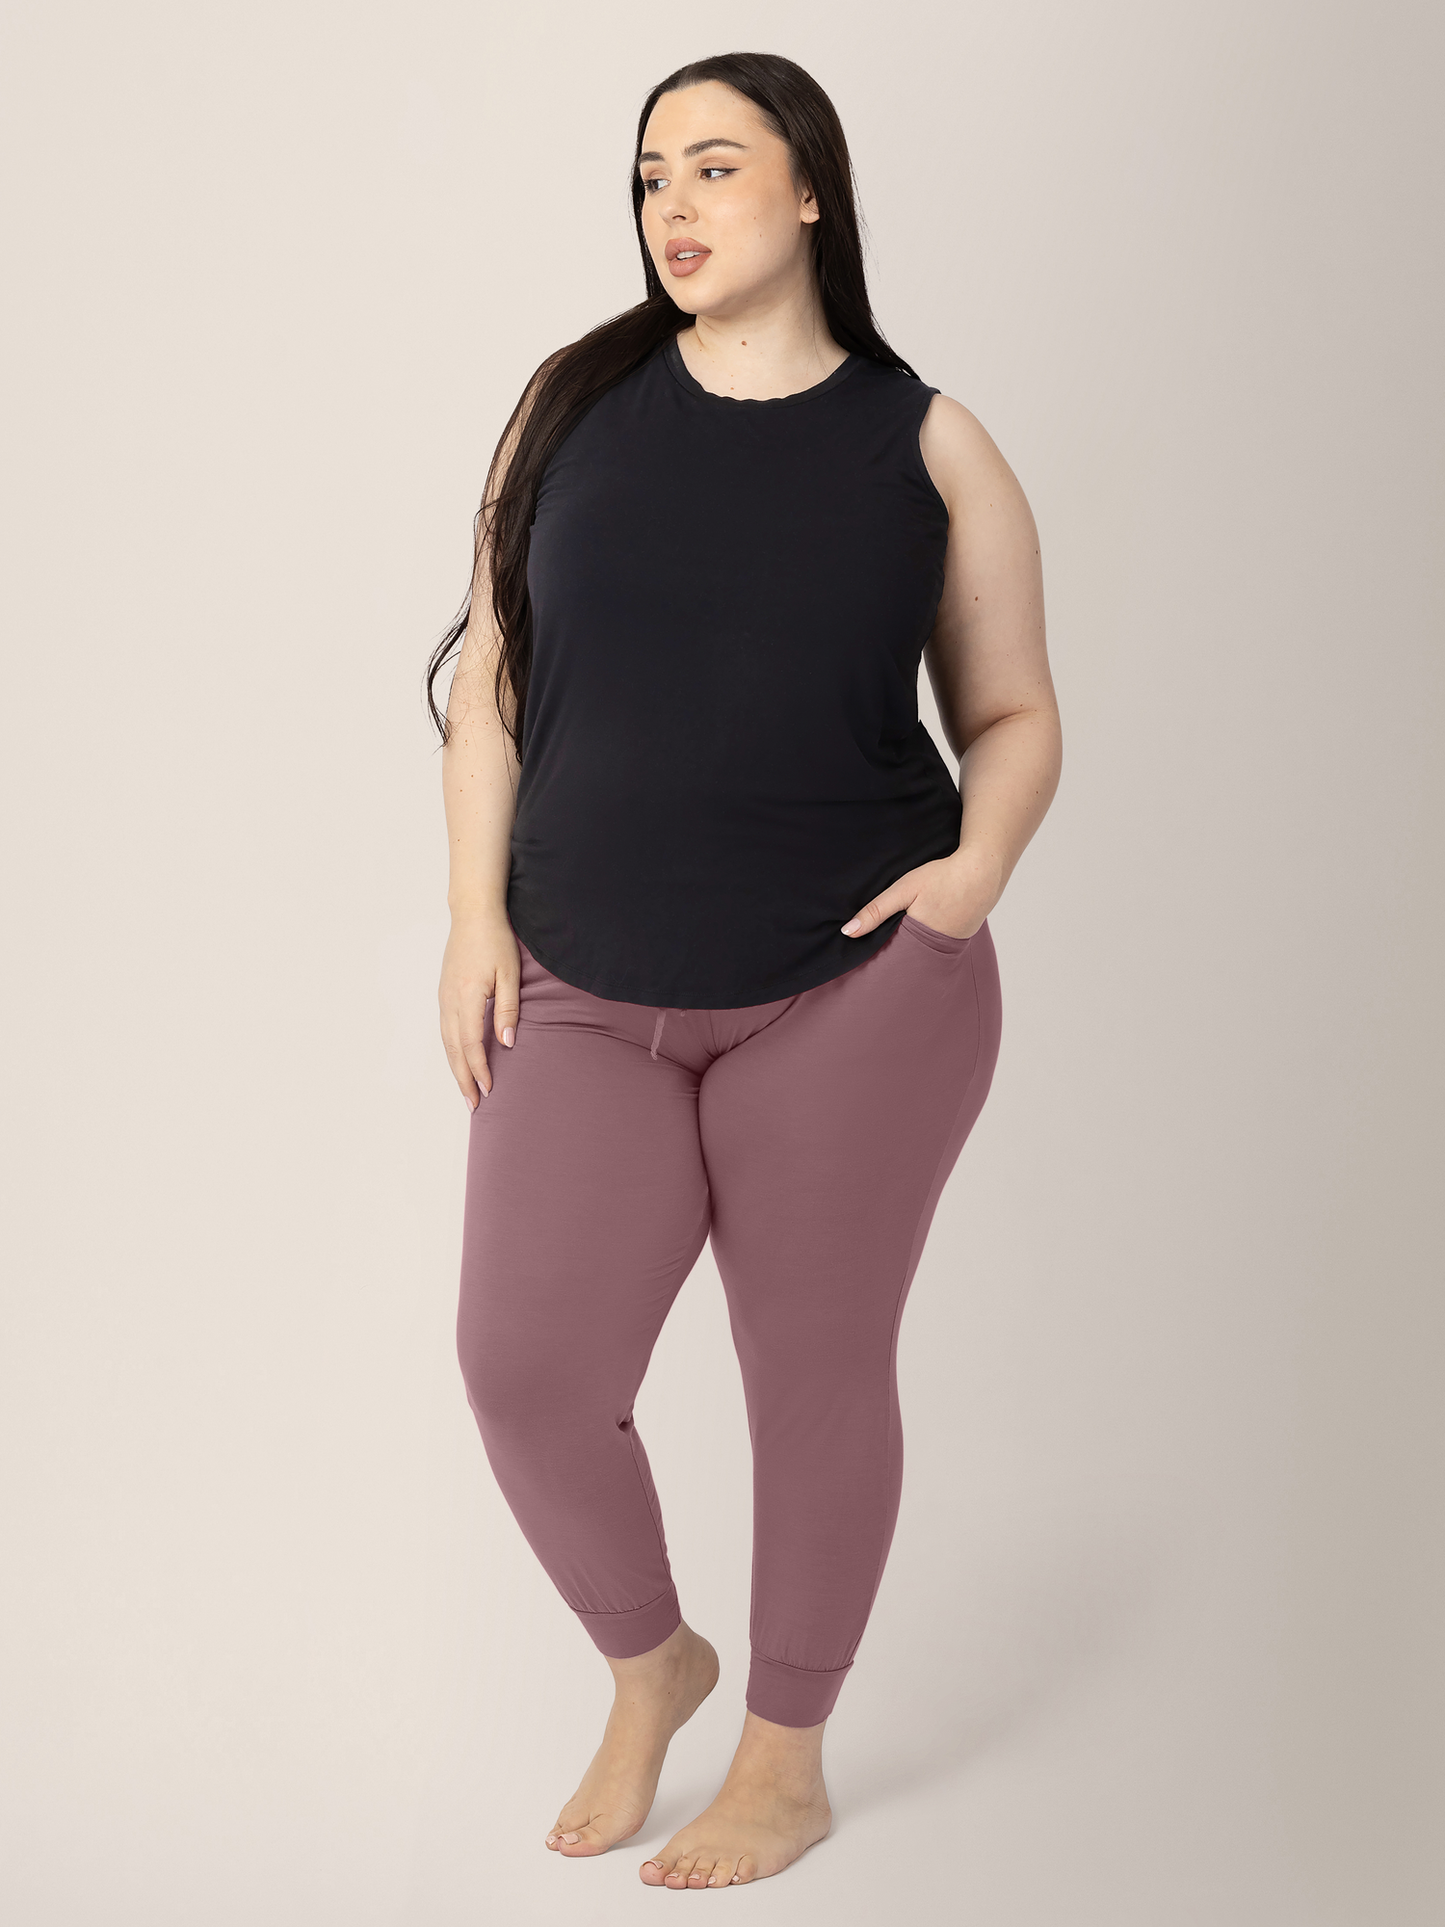 Model styling the Bamboo Nursing & Maternity Tank in Black with the Twilight Everyday Lounge Jogger.